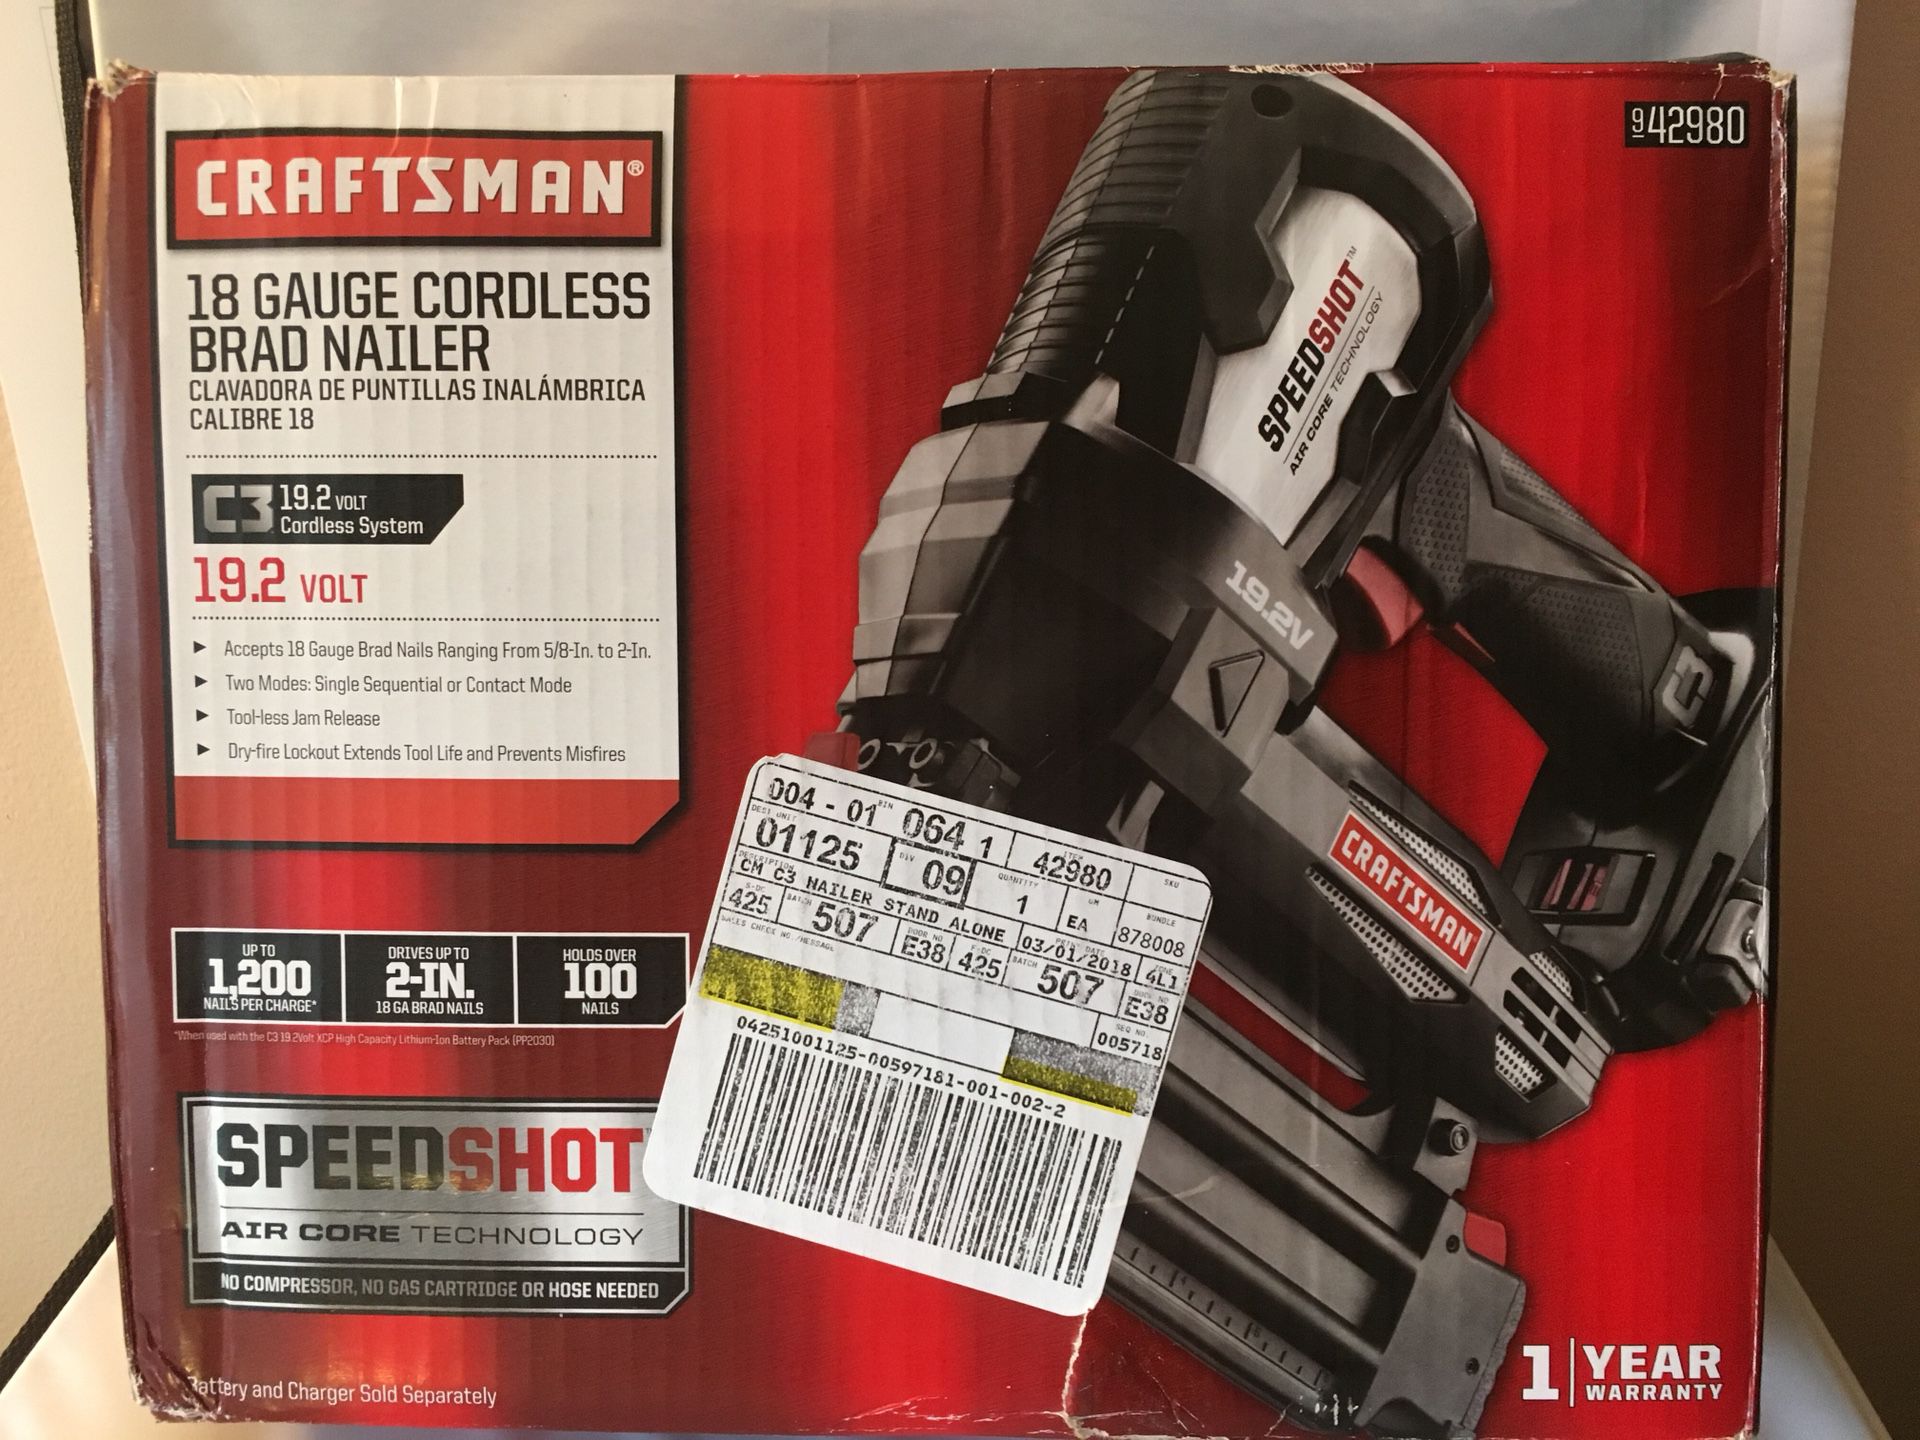 Craftsman C3 19.2V Brad Nailer for Sale in Lauderdale-by-the-Sea